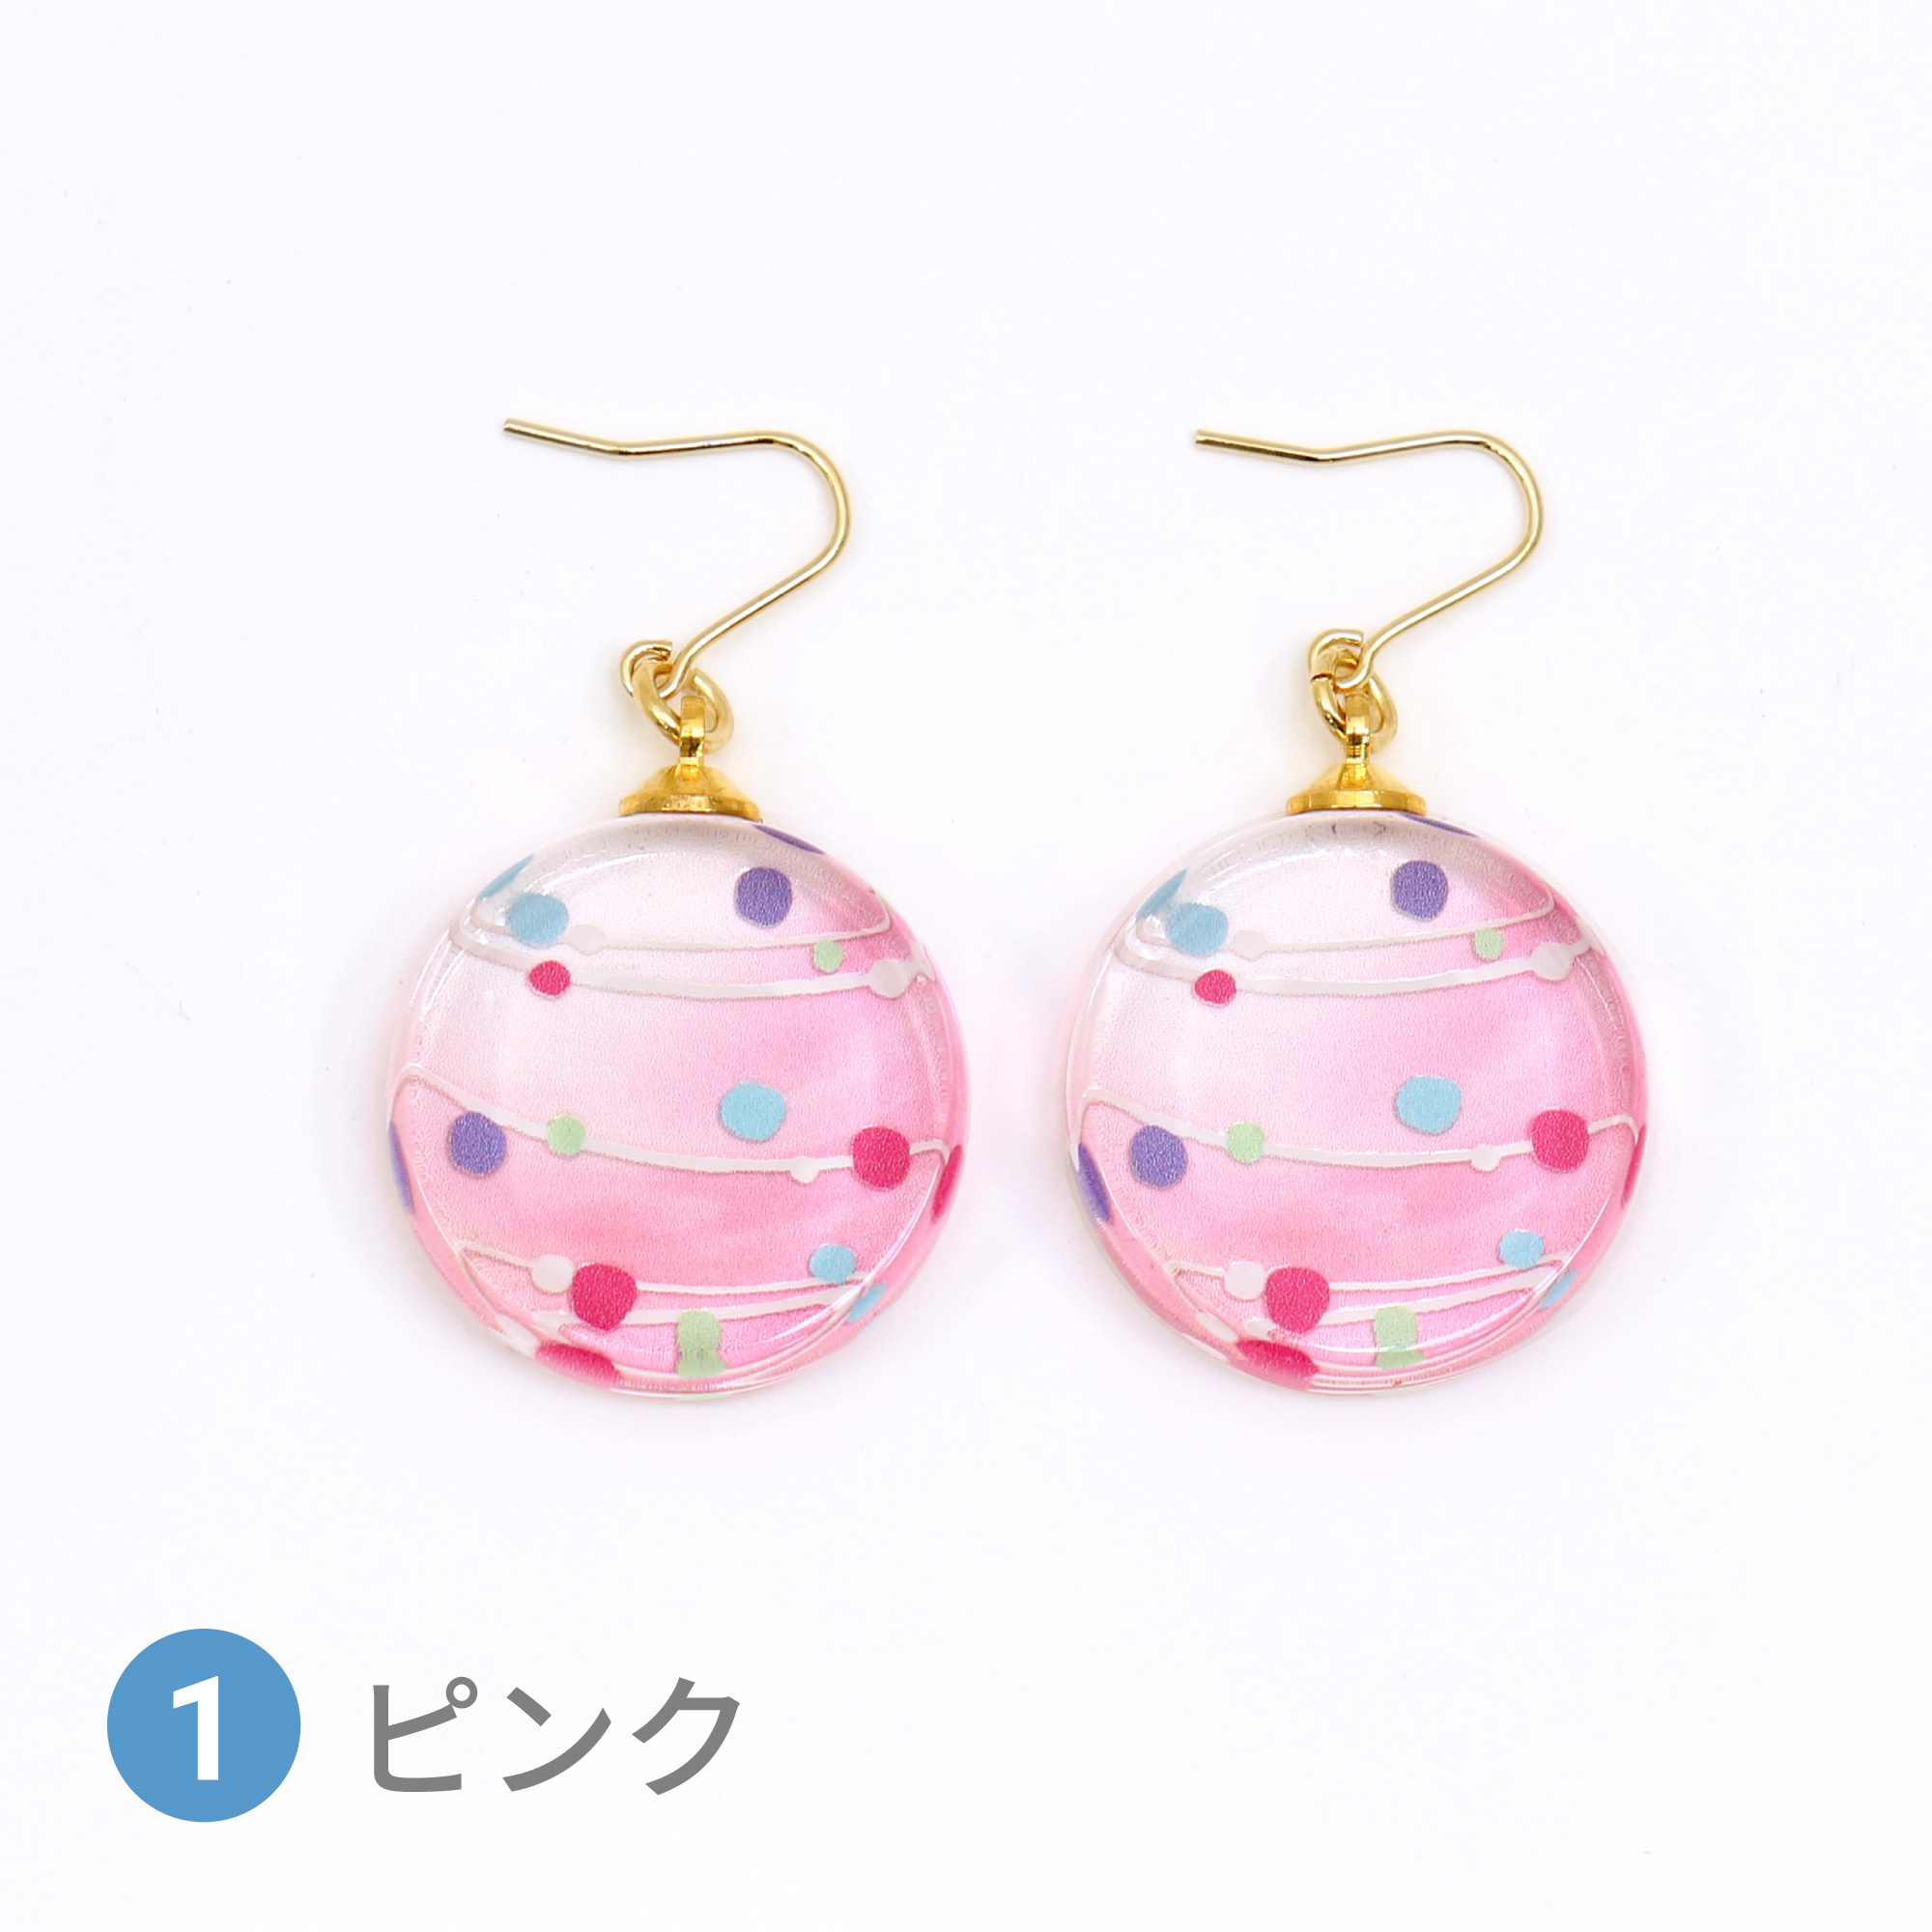 Glass accessories Pierced Earring WATER BALLOON pink round shape